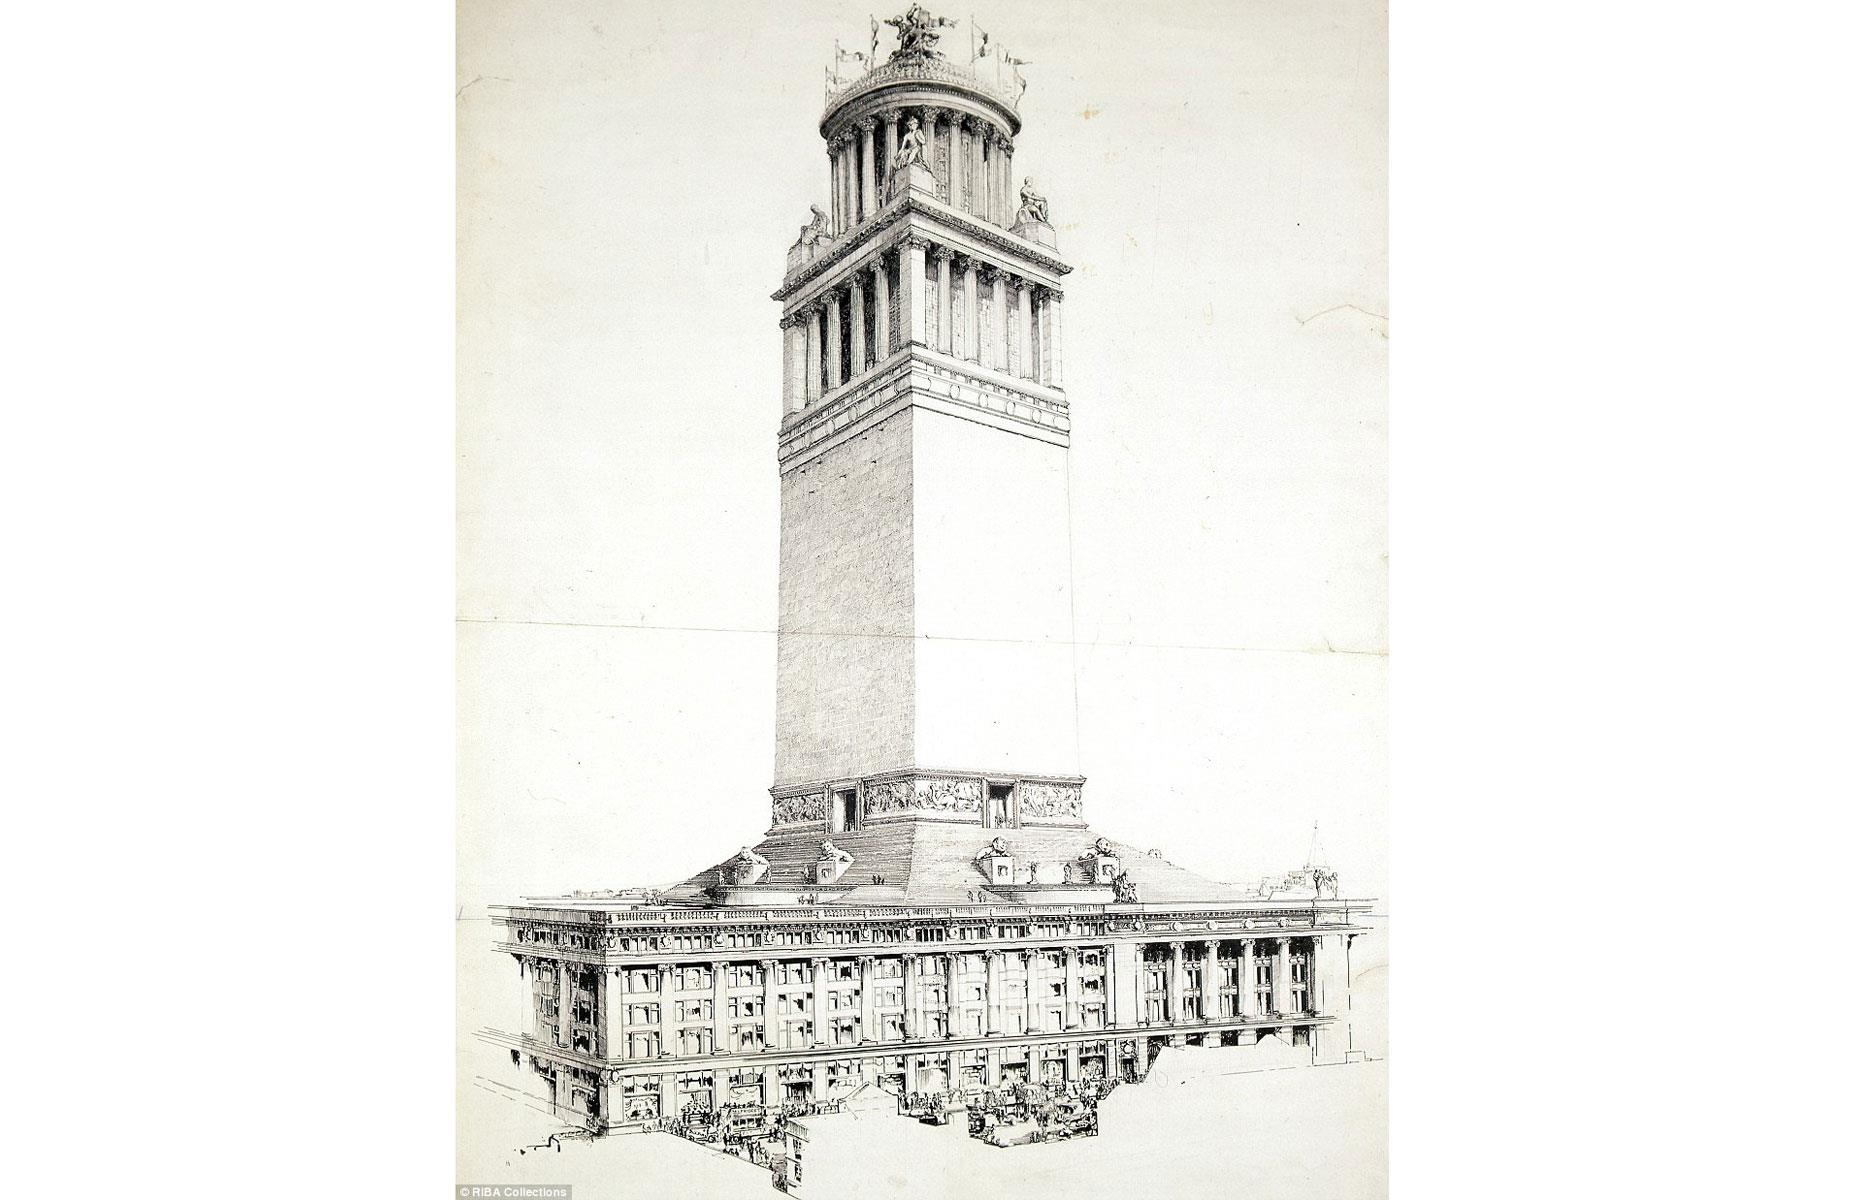 An imposing, comically implausible 450-foot tower was proposed for the department store in 1918 by architect Philip Armstrong Tilden, and Harry Gordon Selfridge reportedly lobbied the local council for years to grant him planning permission for the tower, before he eventually lost interest.